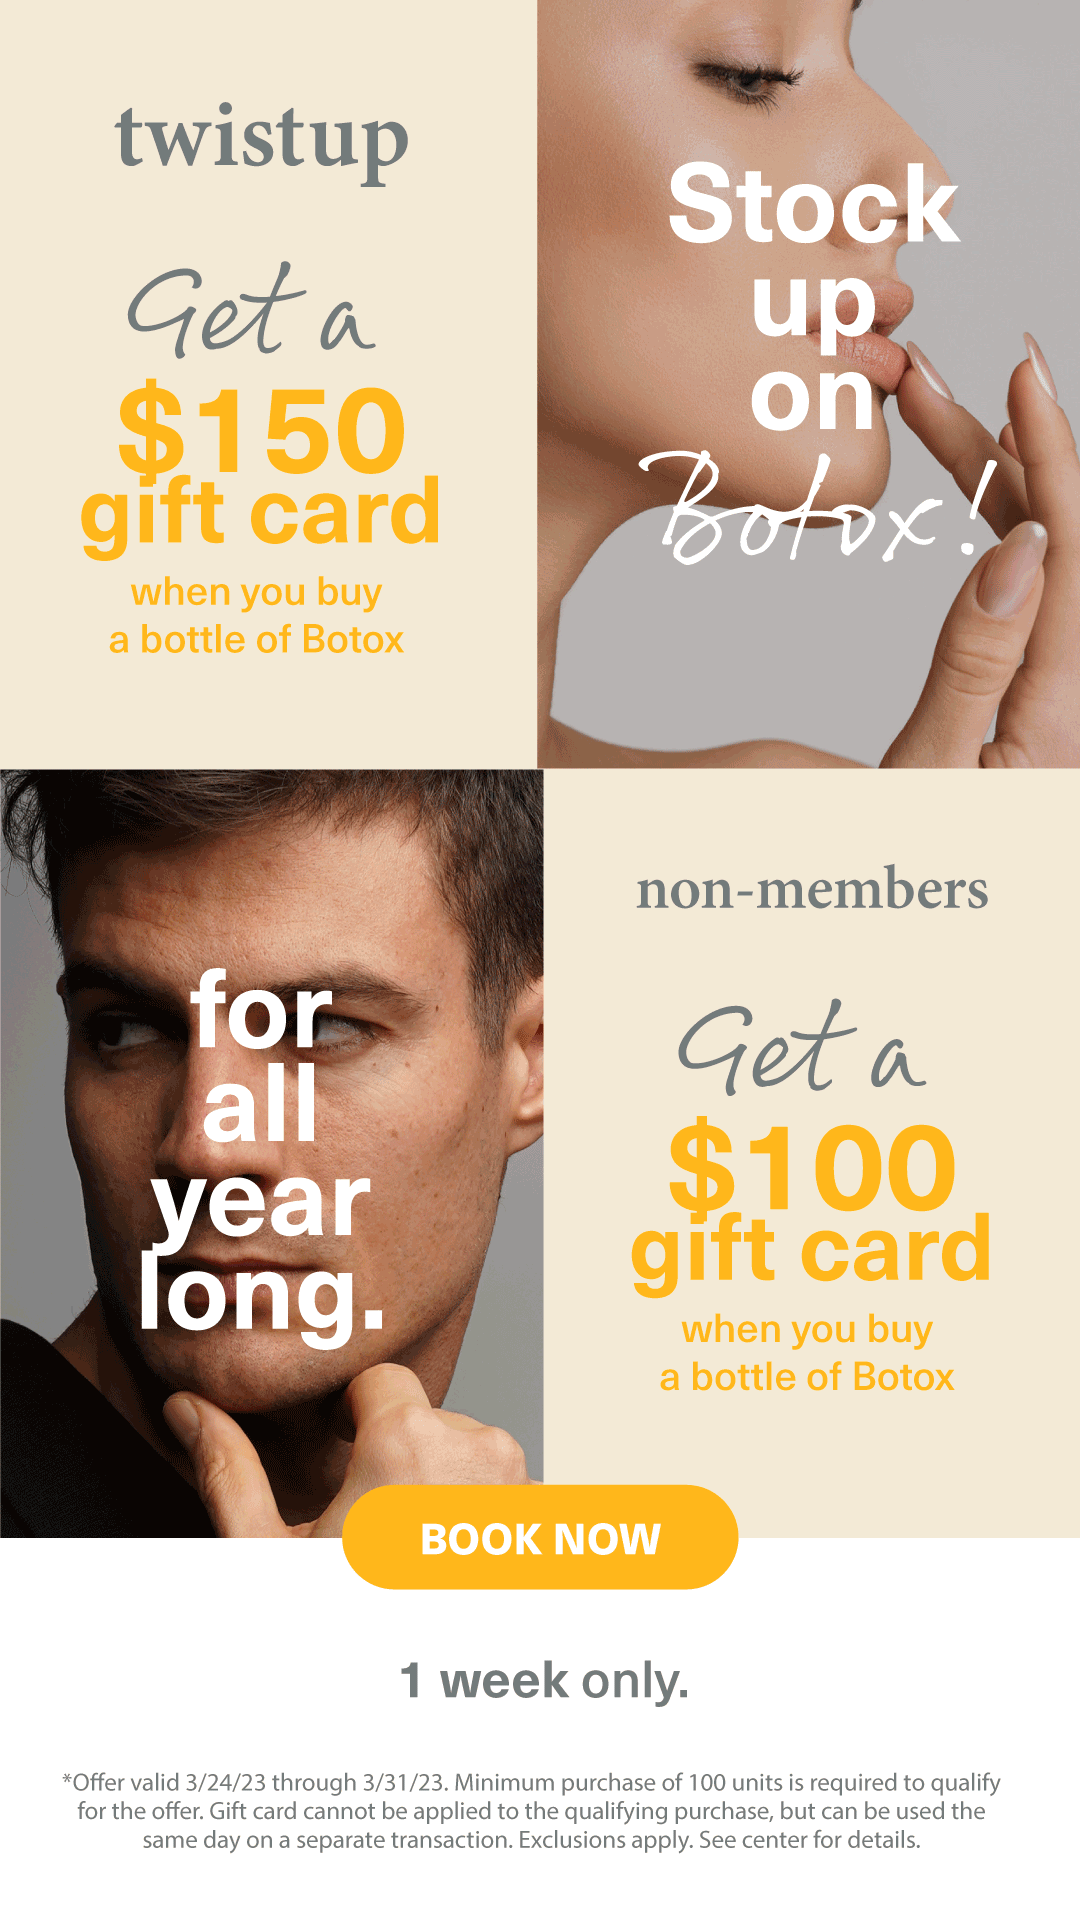 Get a $150 gift card when you buy a bottle of botox